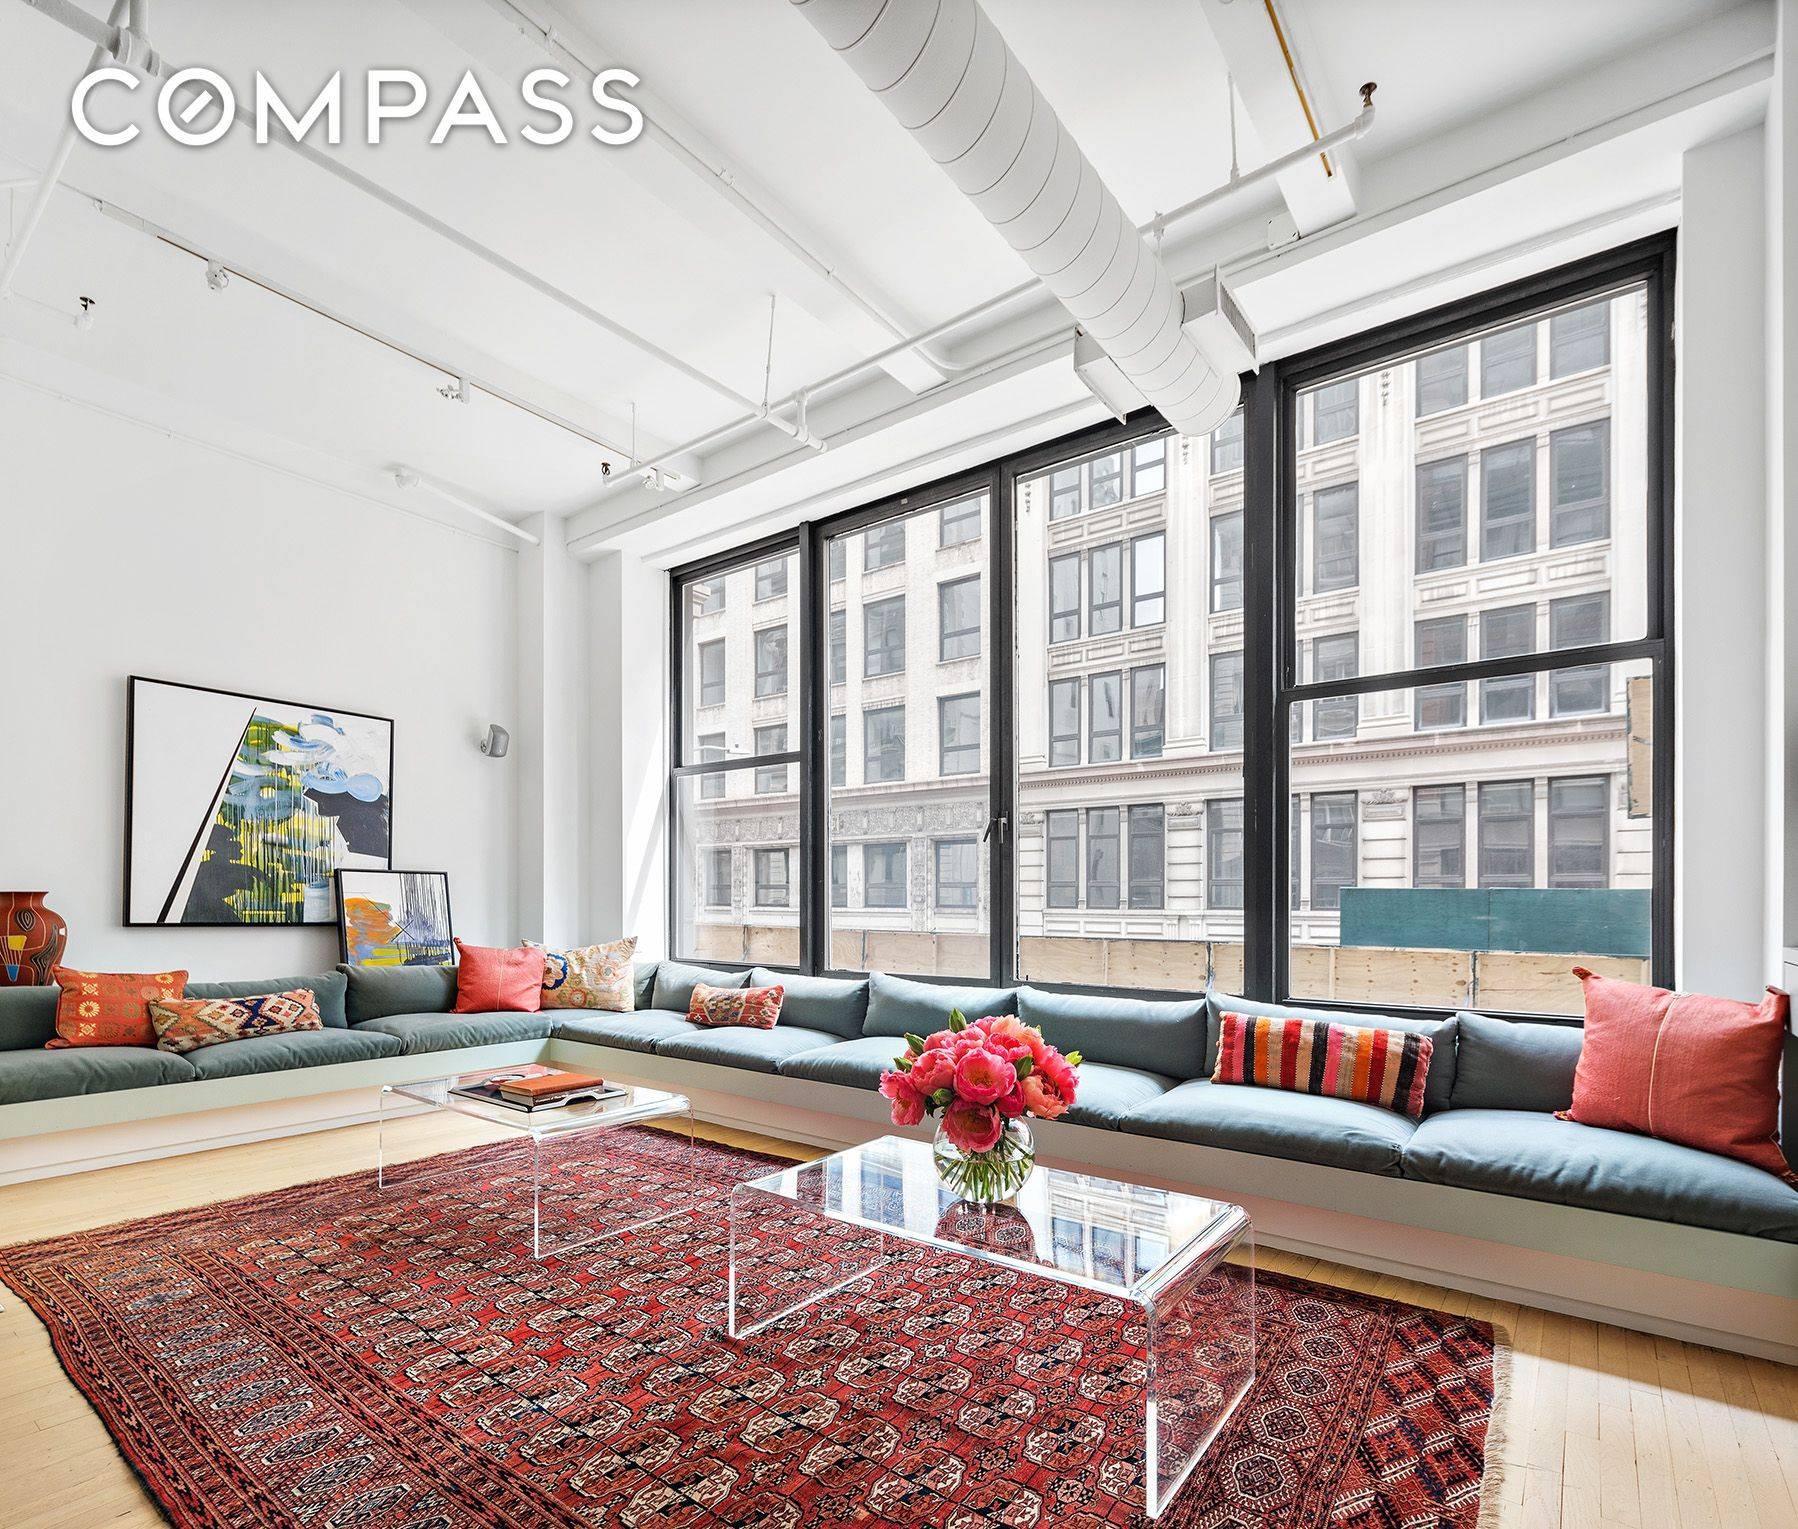 Welcome home to 40 East 21st Street.